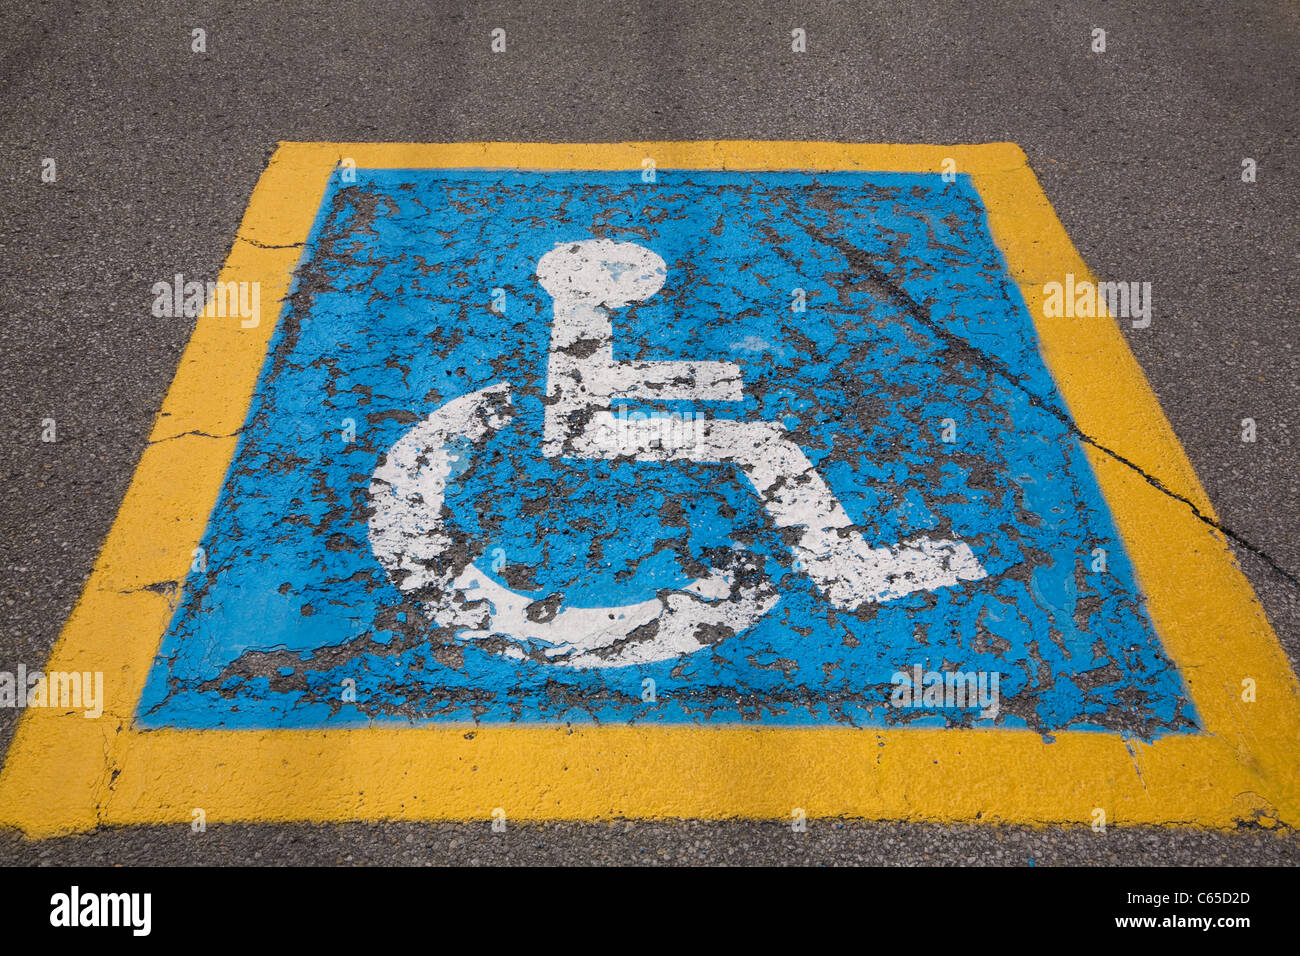 Disabled parking sign Stock Photo